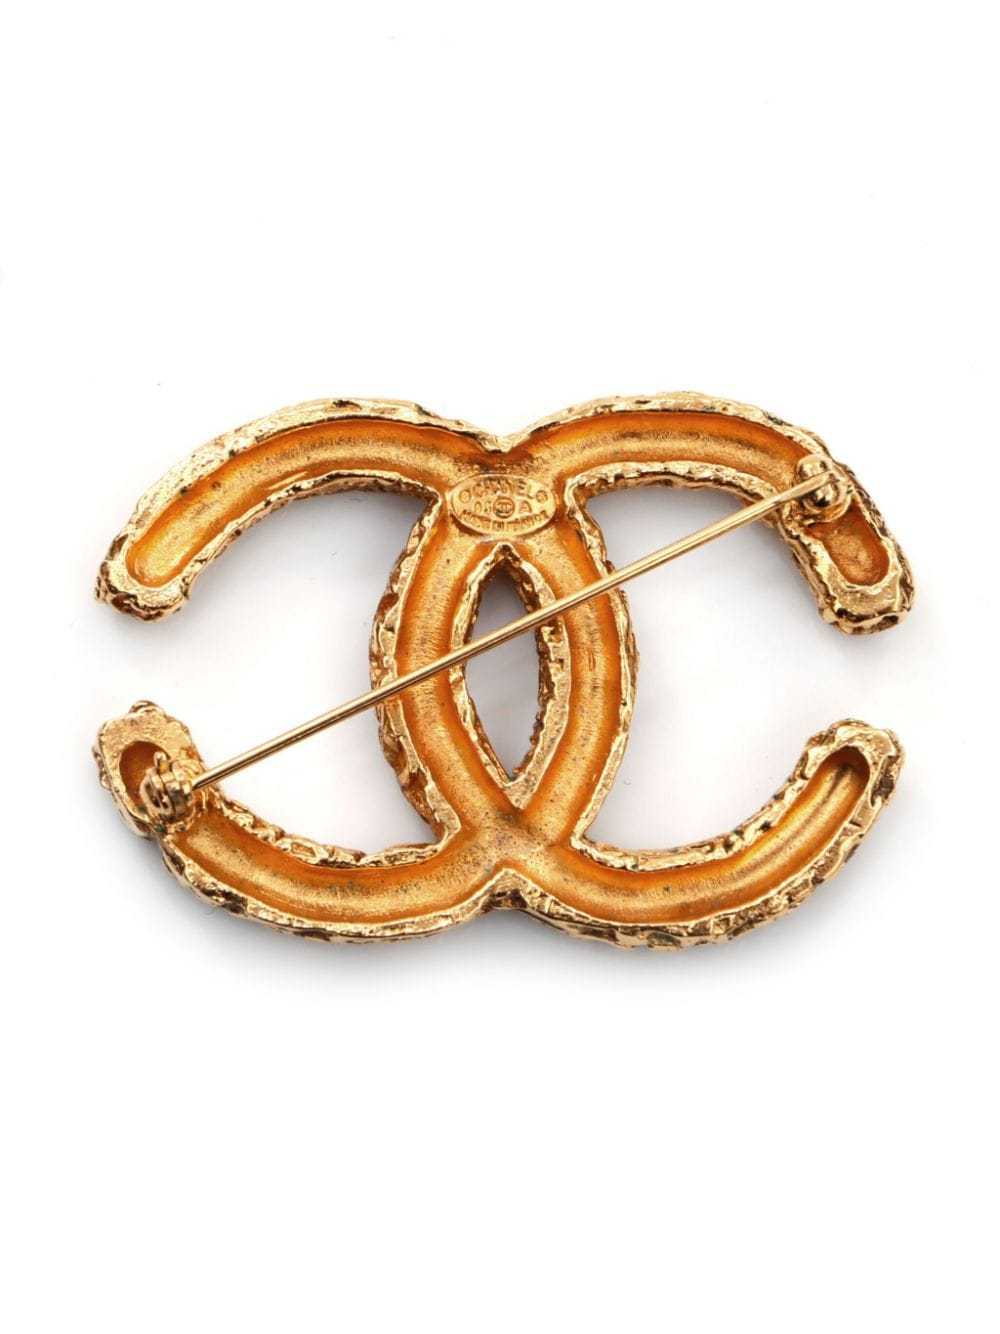 CHANEL Pre-Owned 1993 CC gold plated brooch - image 2